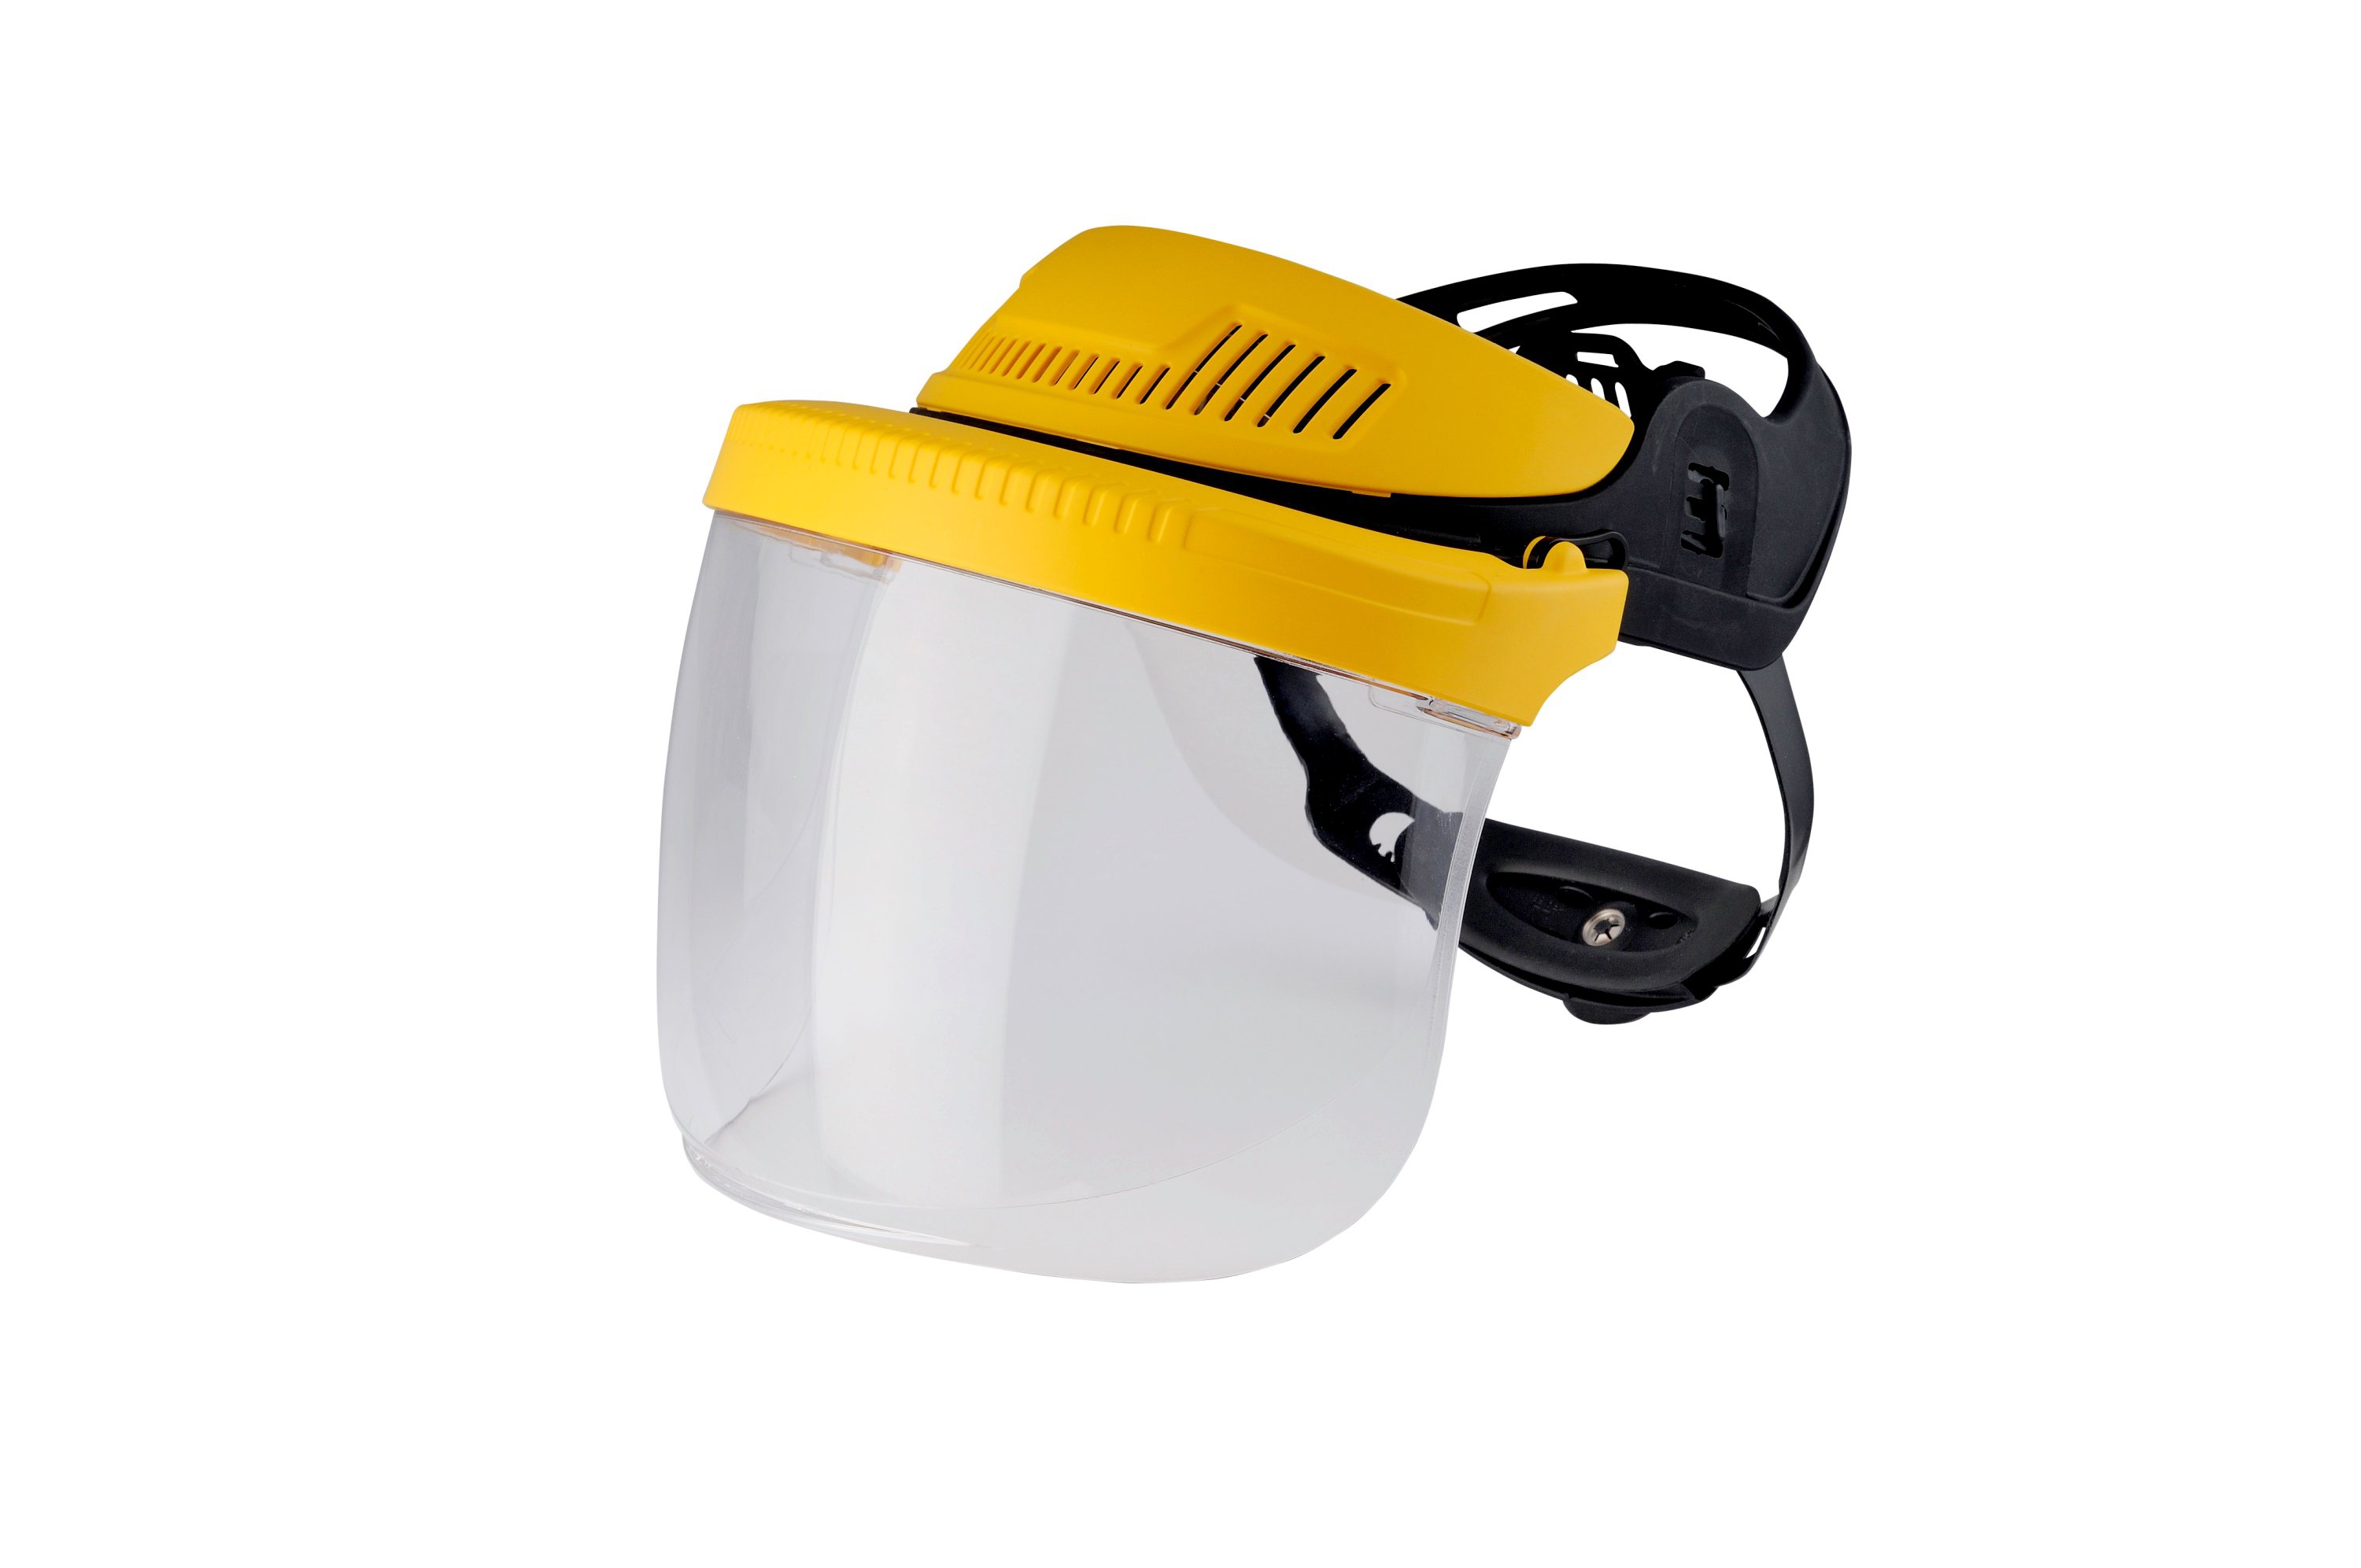 3M Head mount combination, industrial, yellow, G500V5F11-GU Head mount with visor 5F-11 polycarbonate